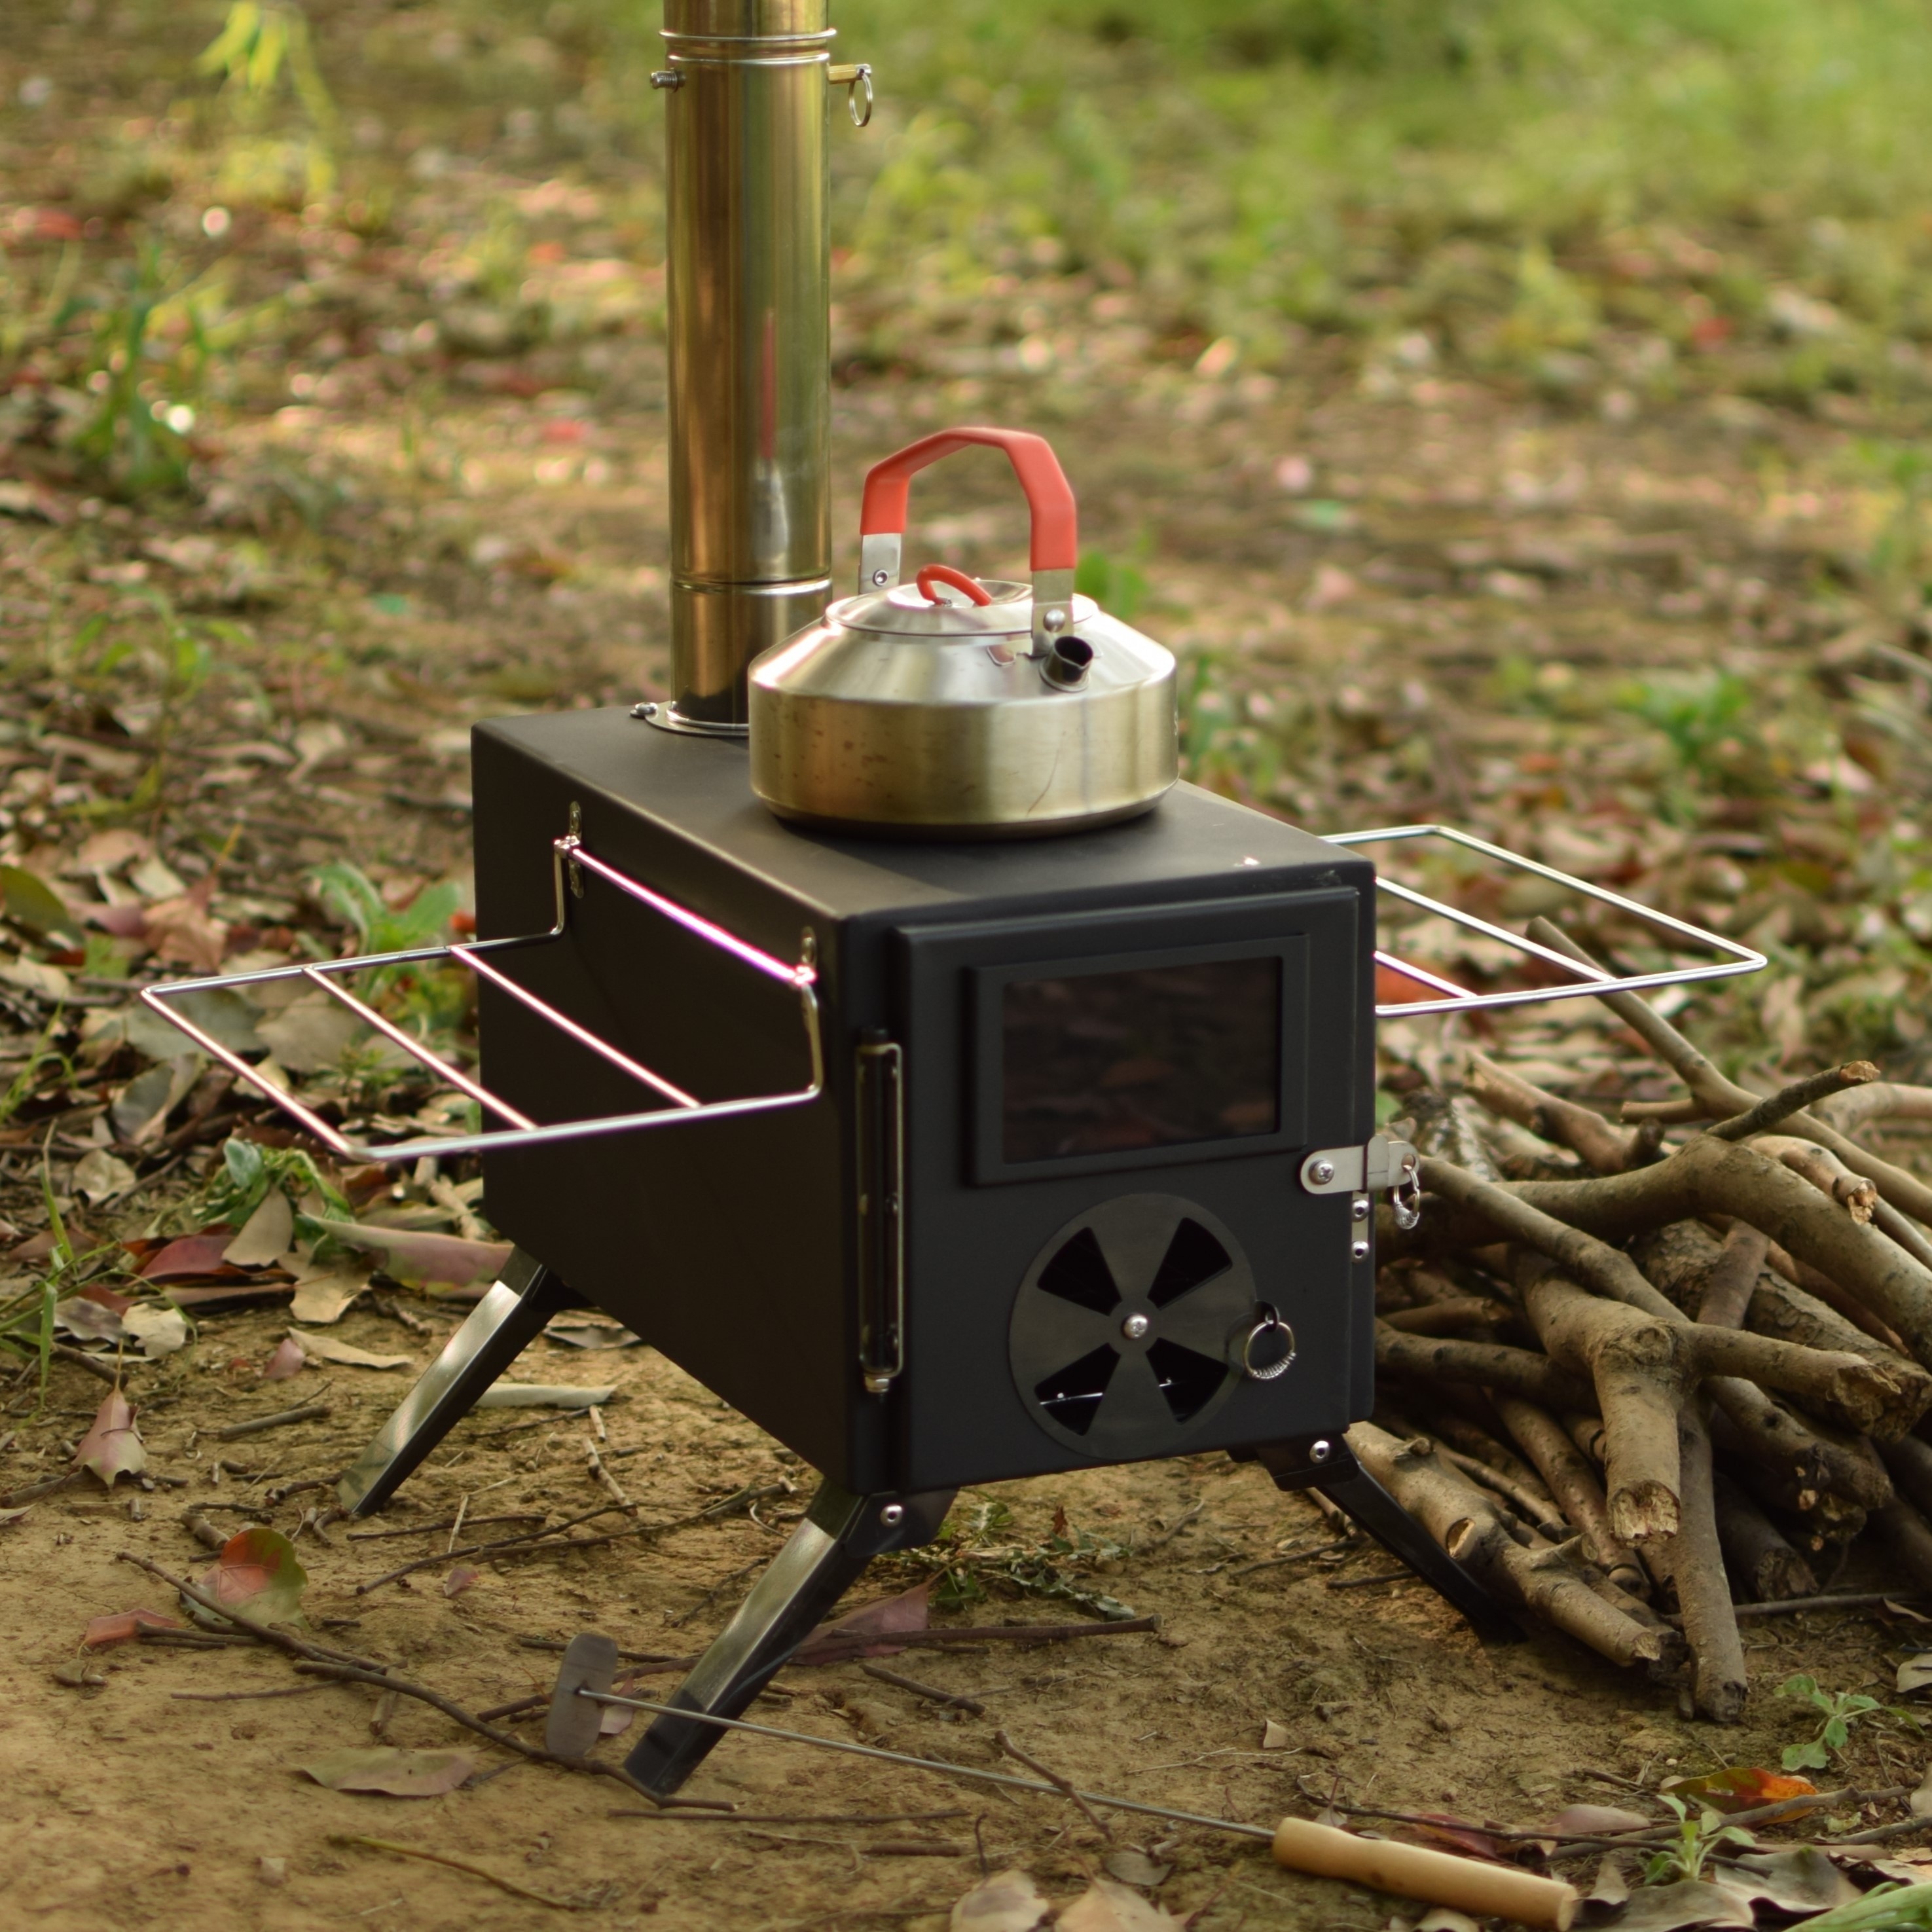 Outdoor Wood & Coal Burning Cast Iron Stove,Tent Stove for Heating Camping  Cooking